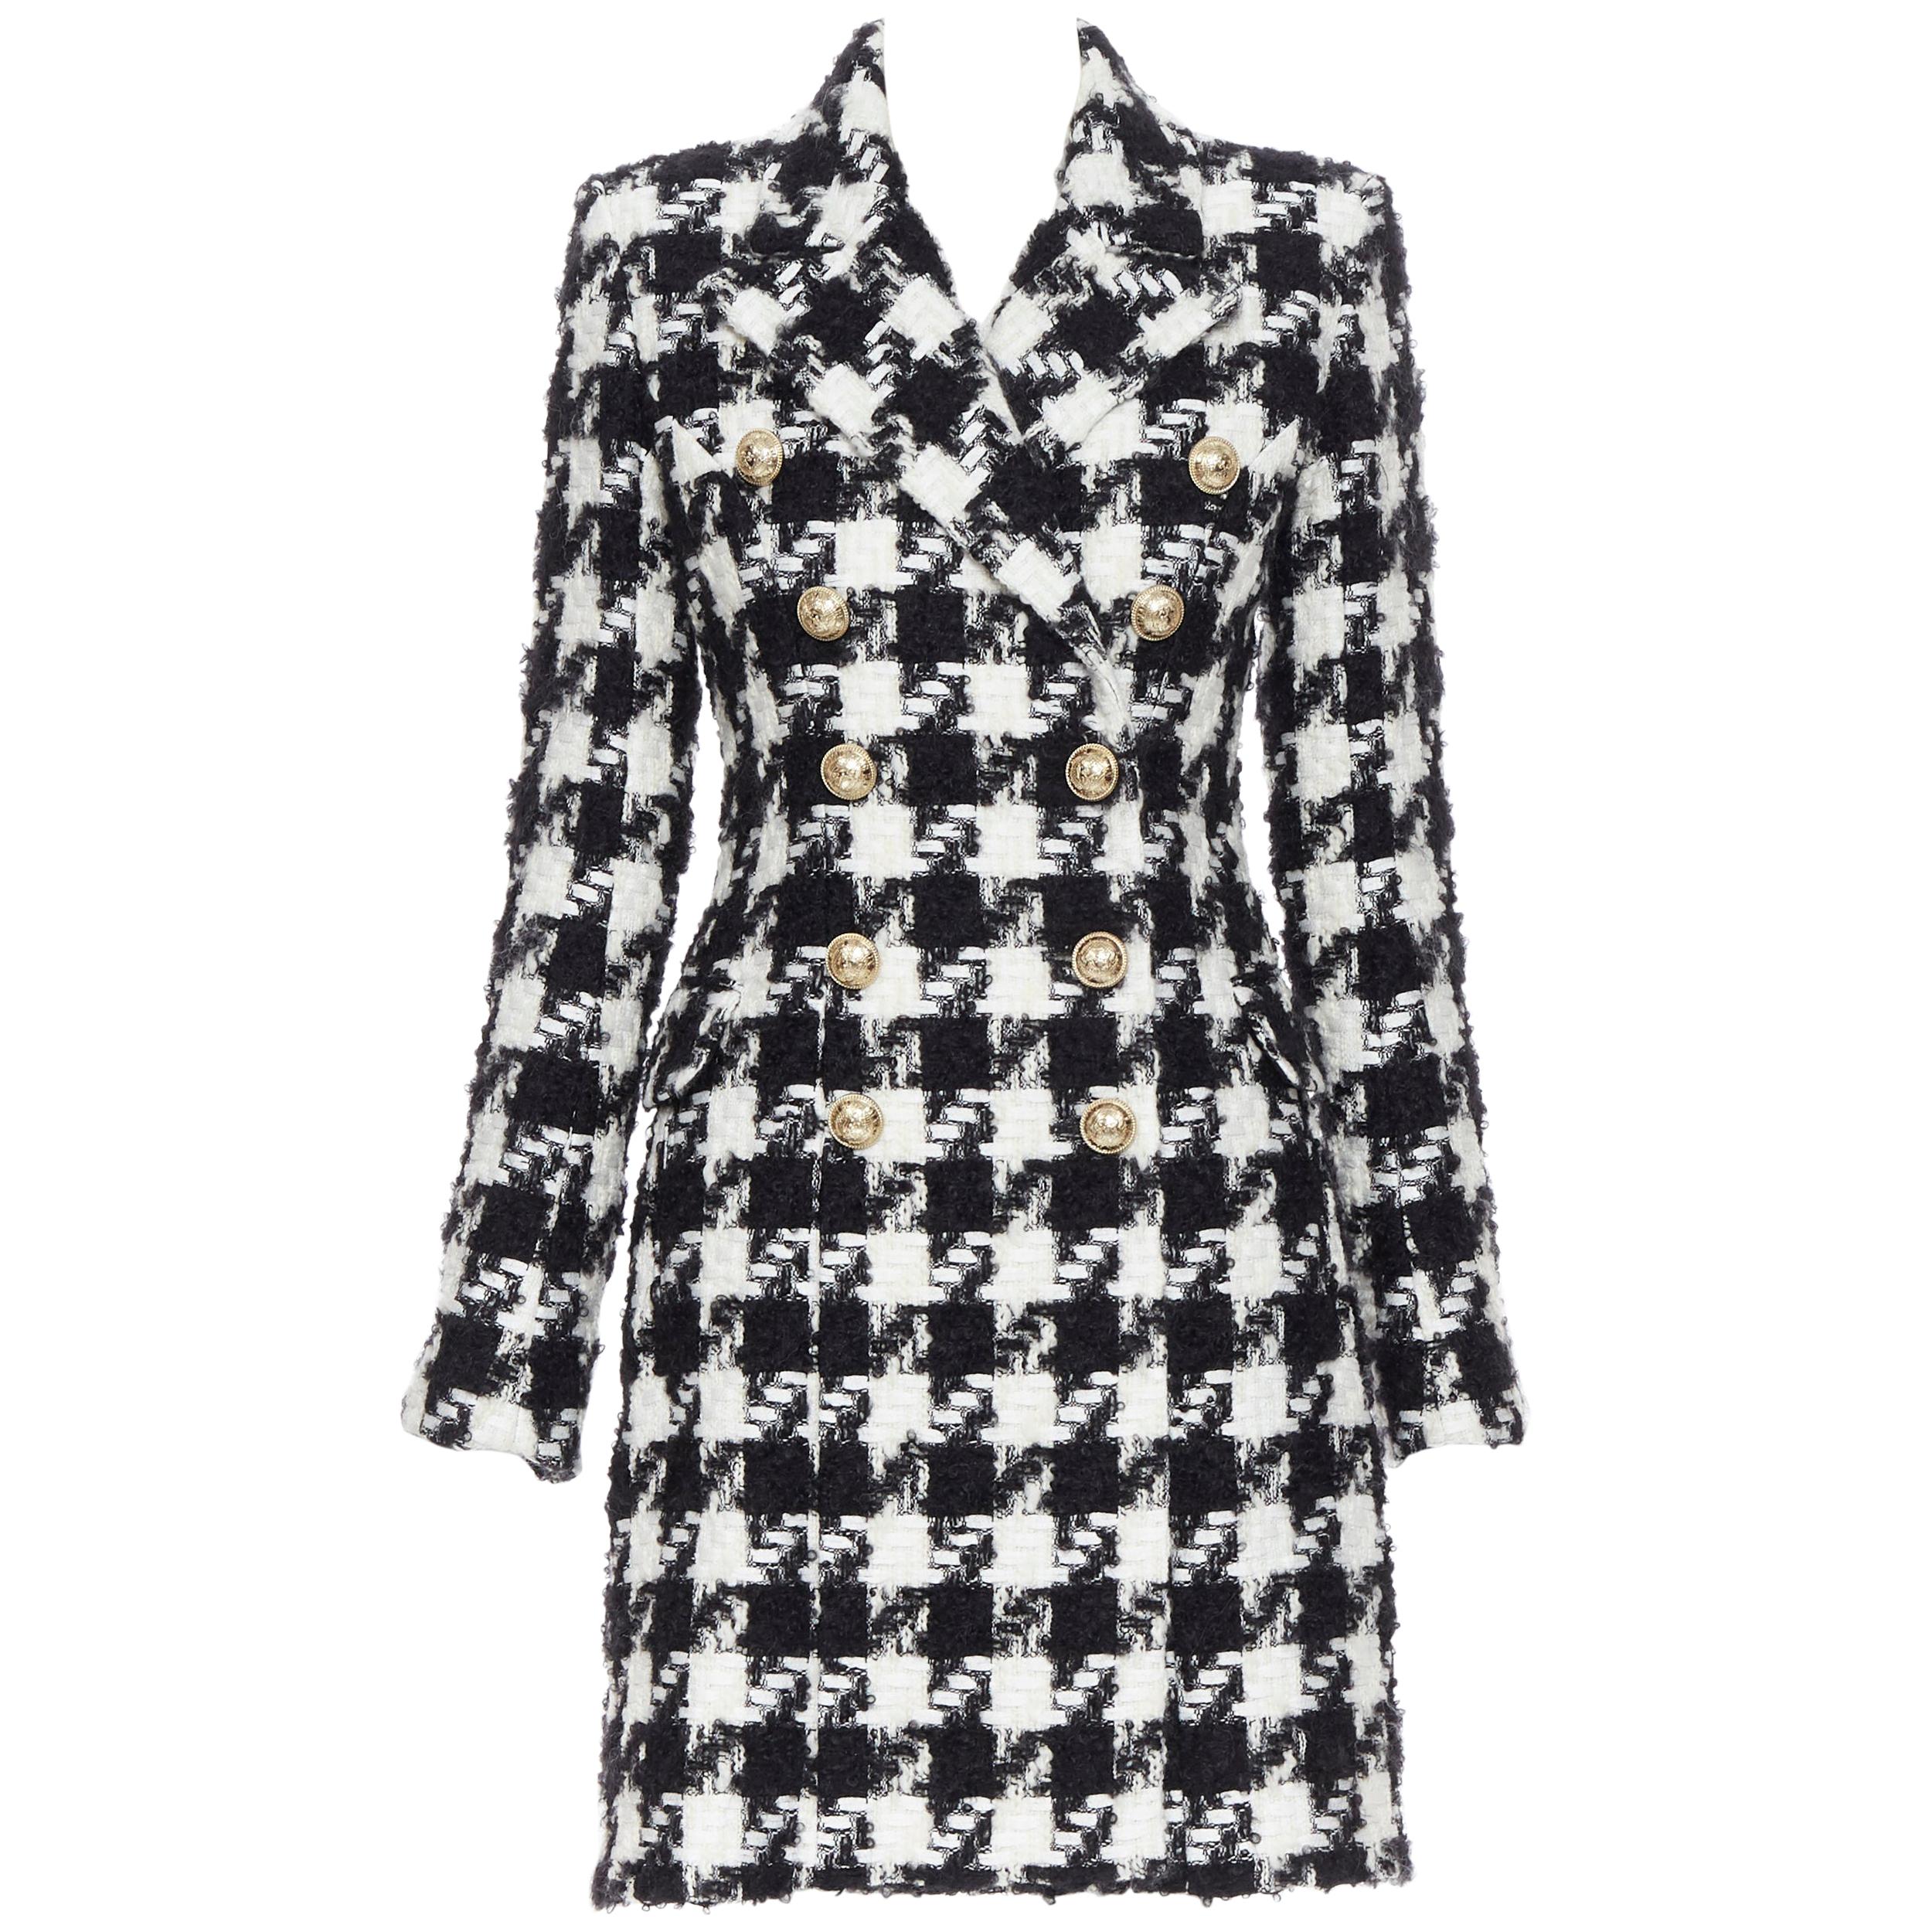 new BALMAIN houndstooth black white tweed double breasted military coat FR34 XS